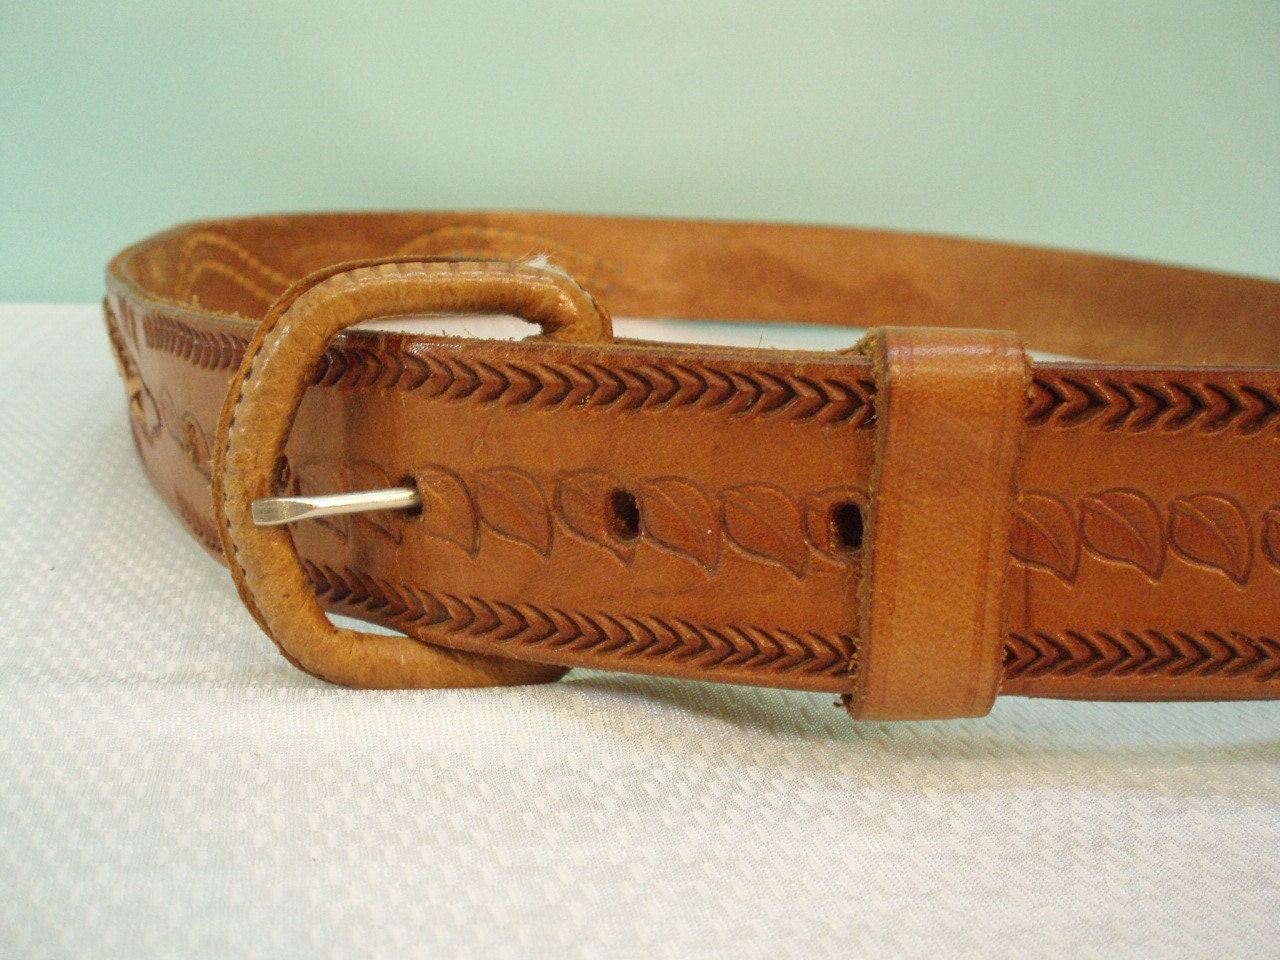 Vintage Hand Tooled Leather Belt Made in Mexico Size 42-44